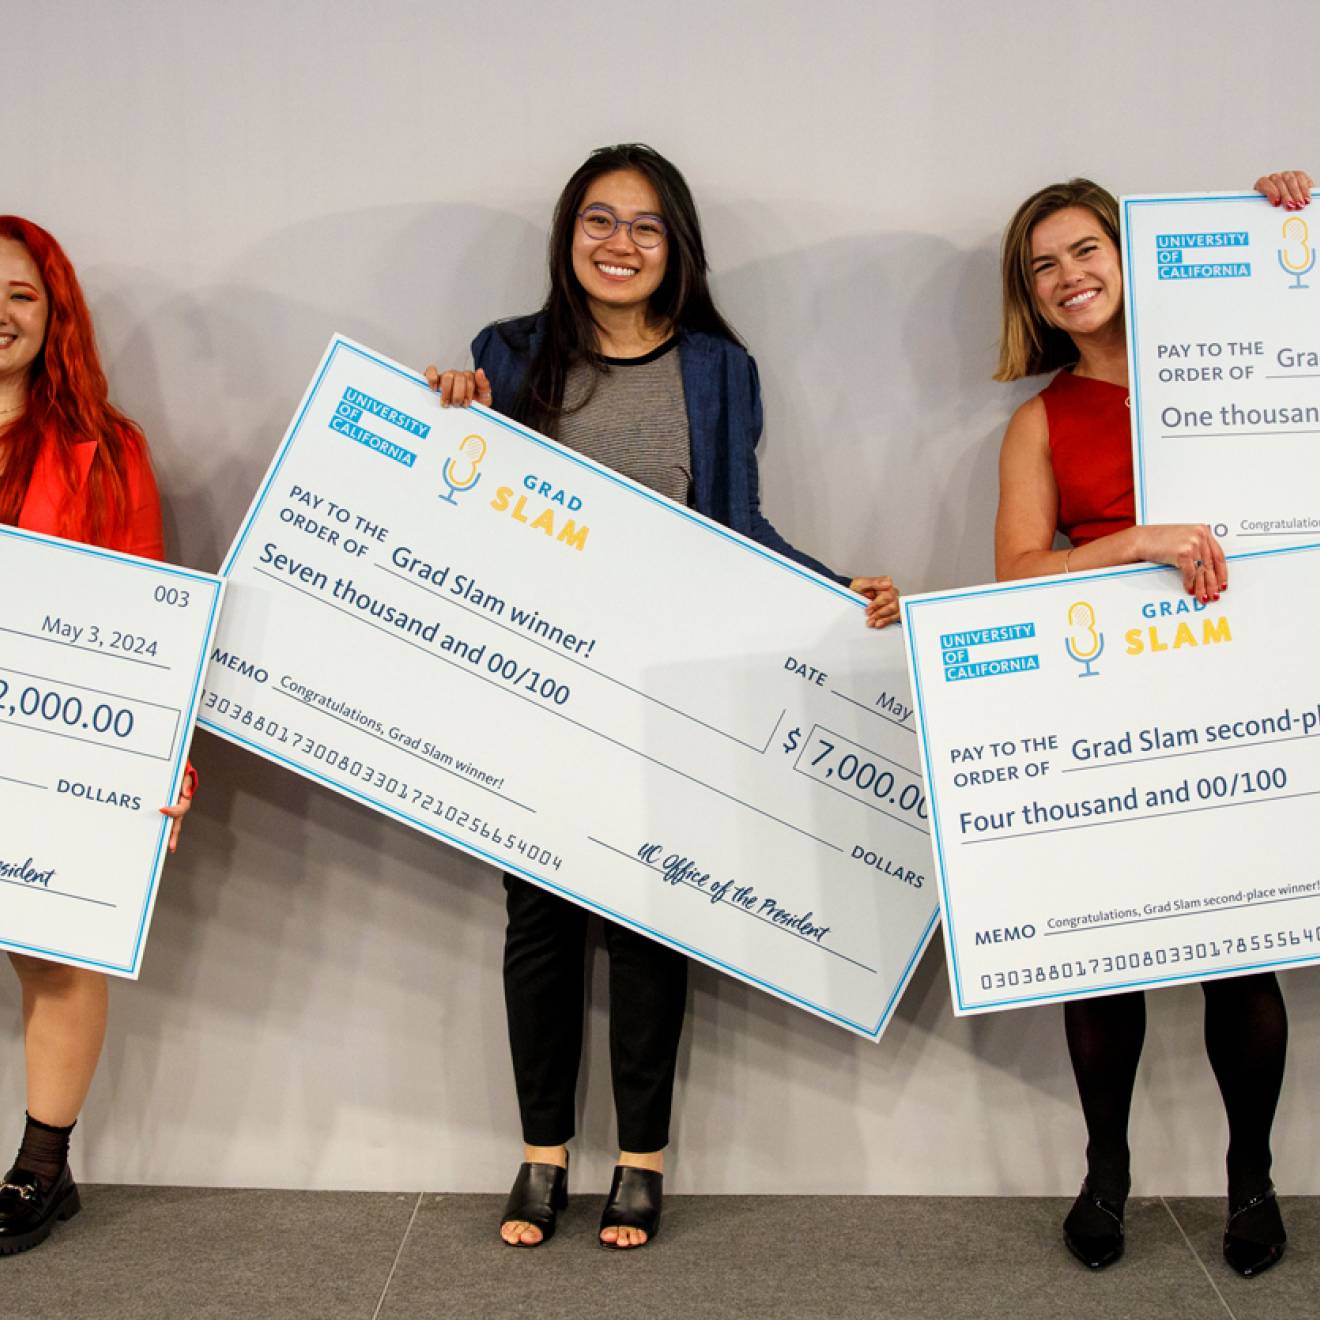 Three people standing holding giant checks